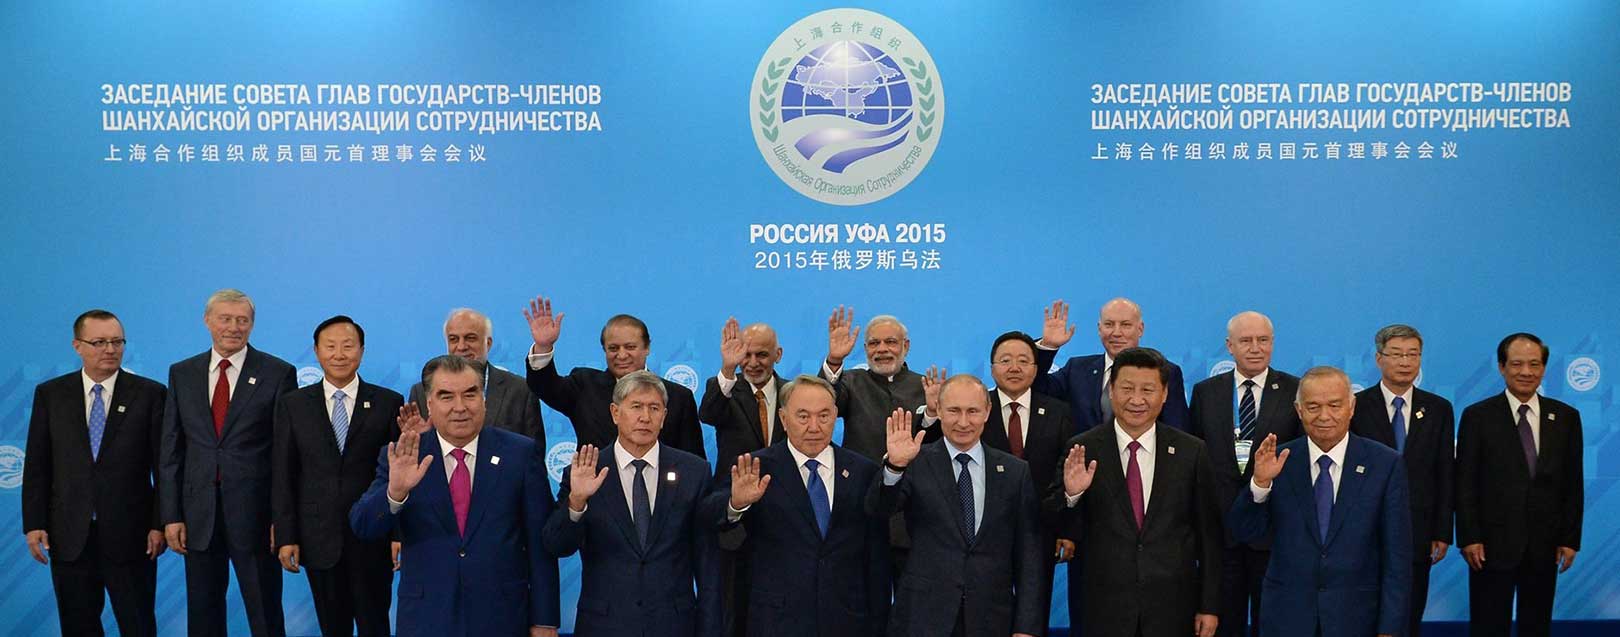 India, Pakistan to become full members in the Shanghai Cooperation Organisation (SCO)  